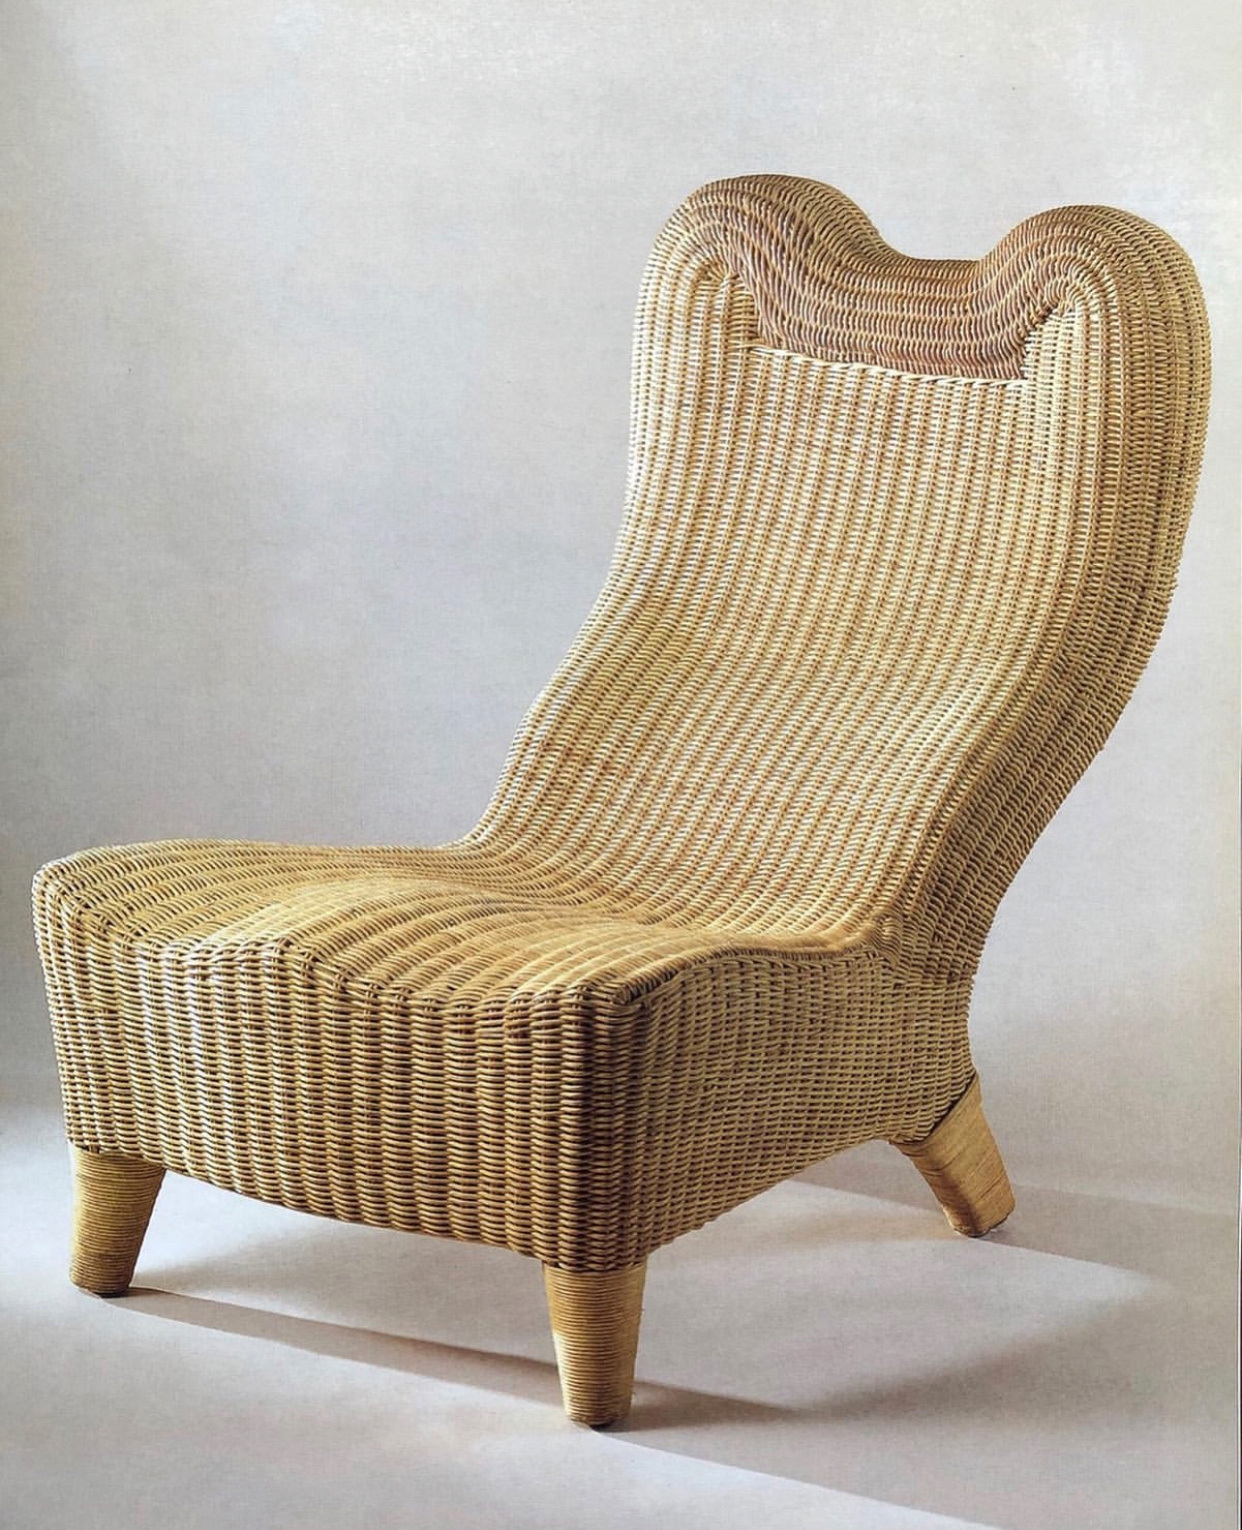 Anthropomorphic&nbsp;Rattan Chair&nbsp;(1943) by Jacques Dumond is a rattan masterpiece, the only model known is part of the collections of the Mus&eacute;e des Arts D&eacute;coratifs in Paris.